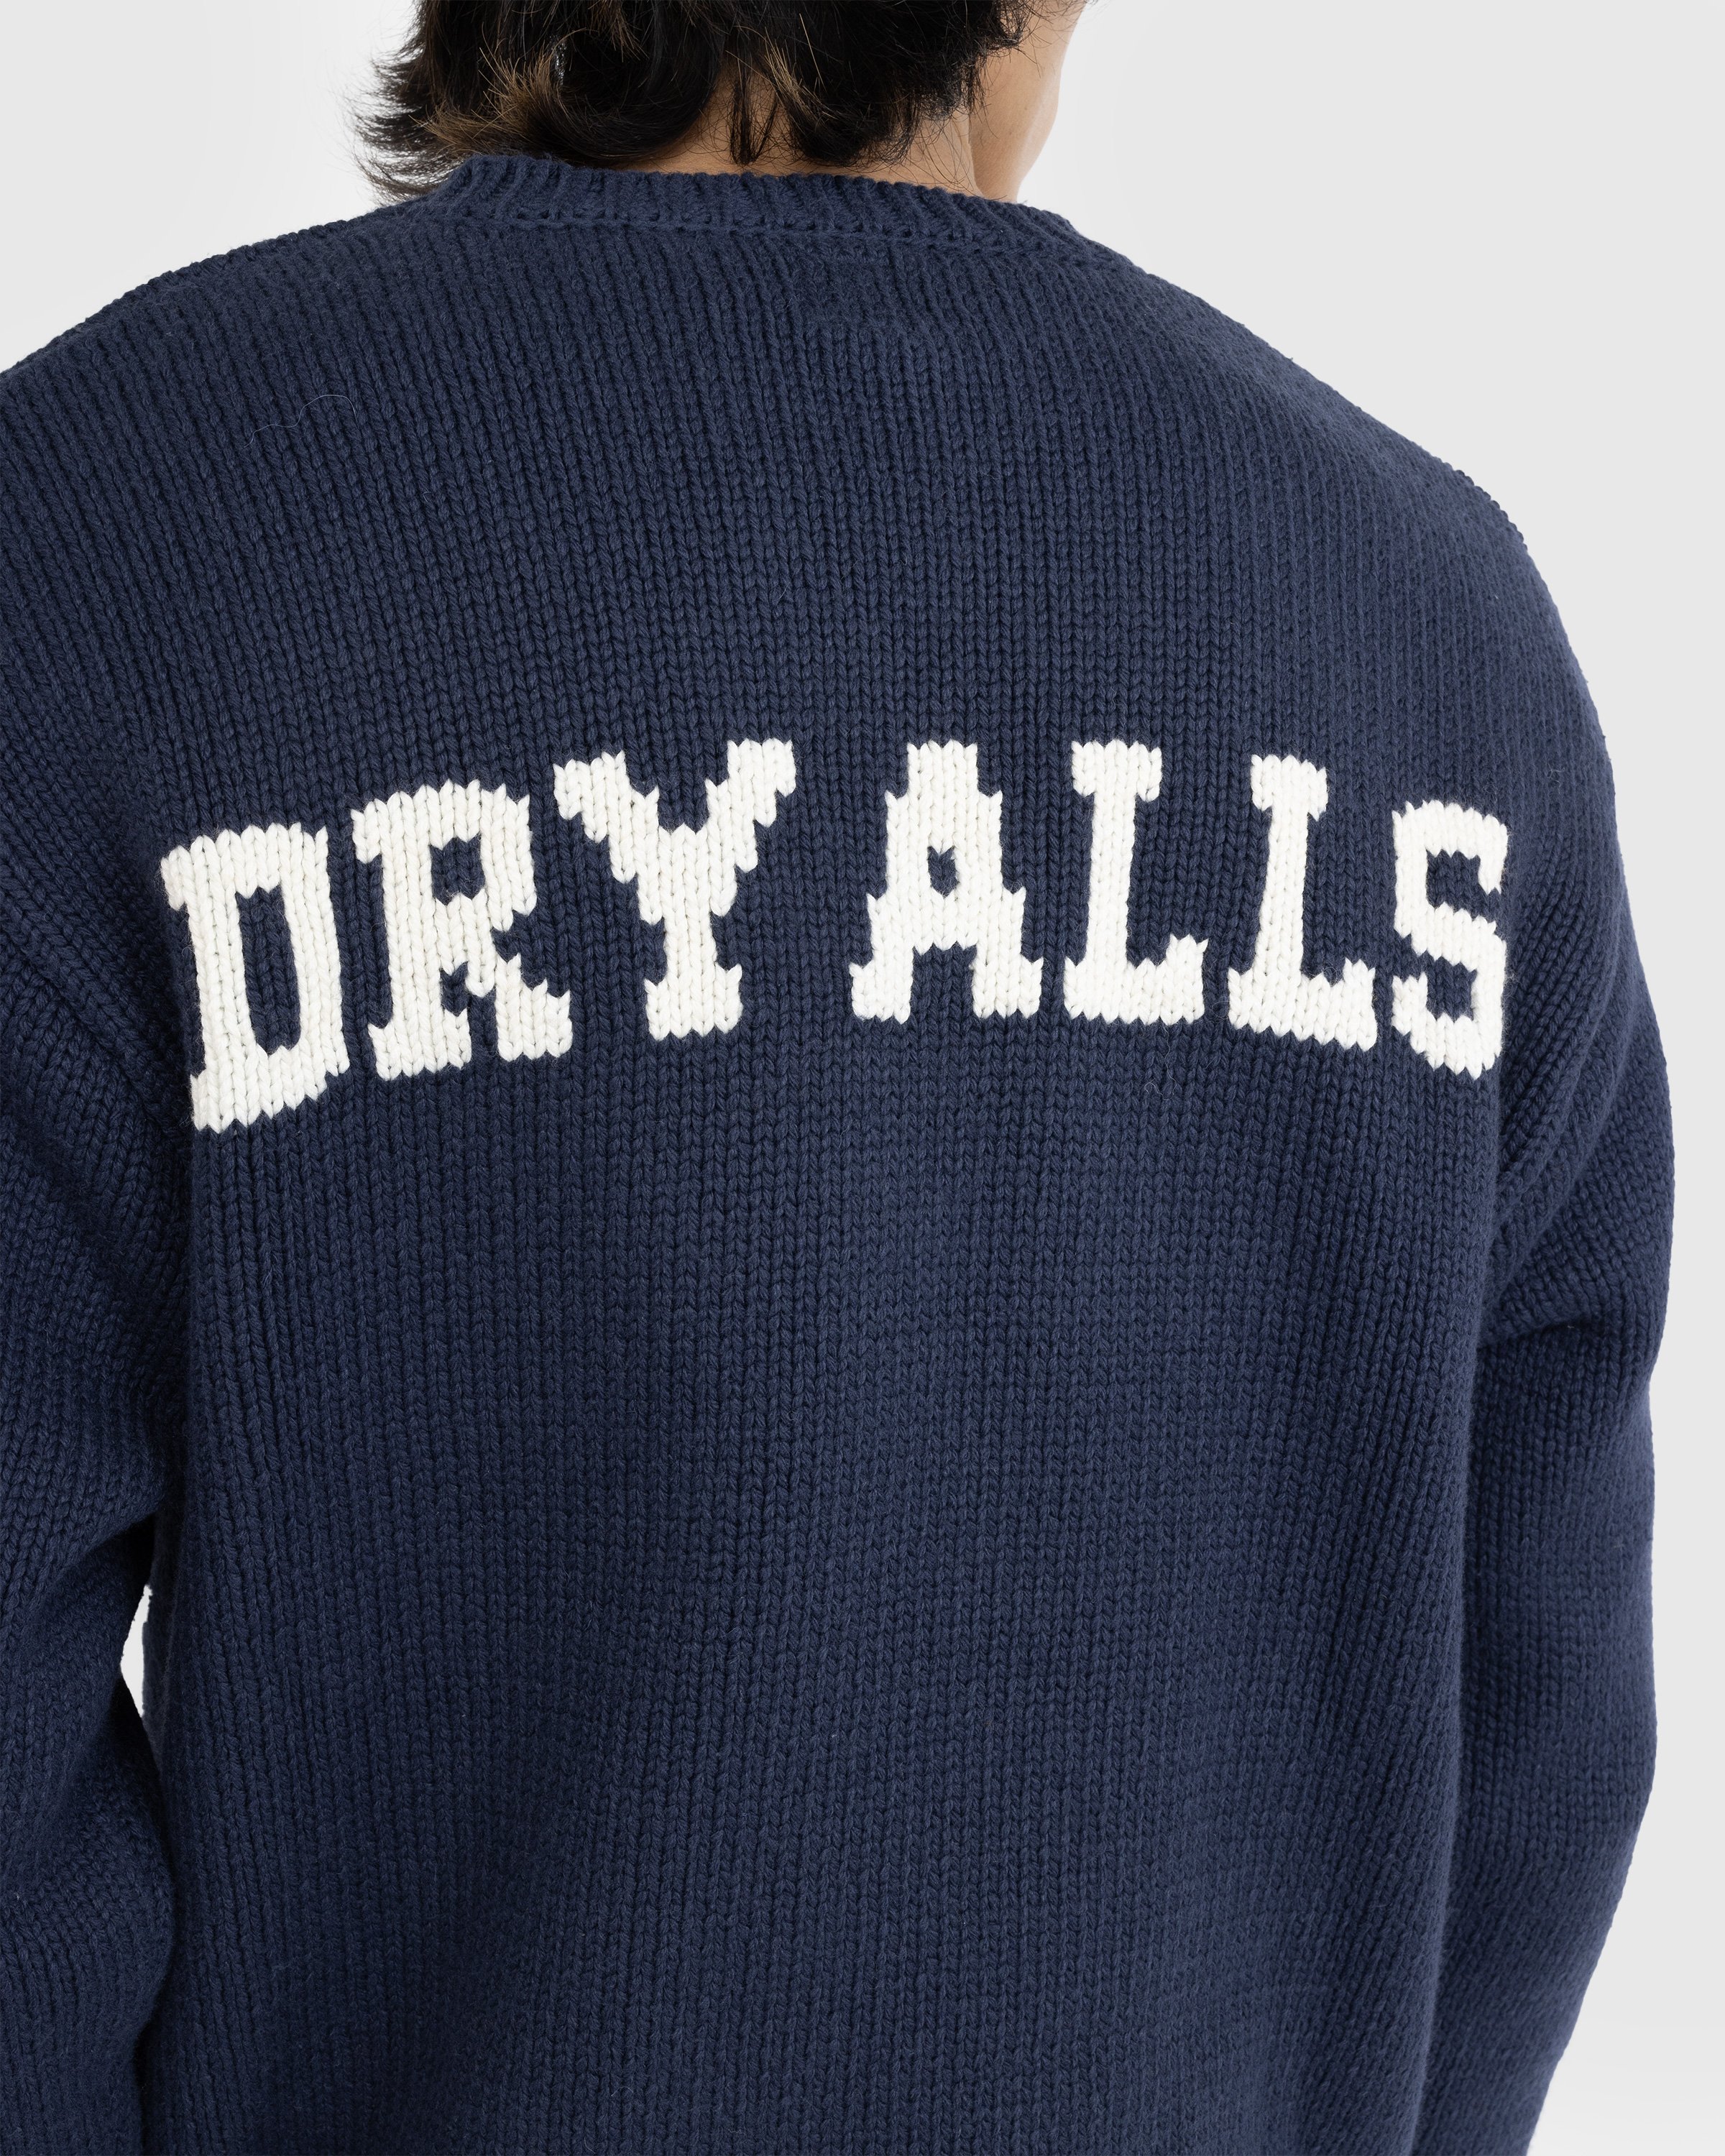 Human Made - Dachs Knit Sweater Navy - Clothing - Blue - Image 7